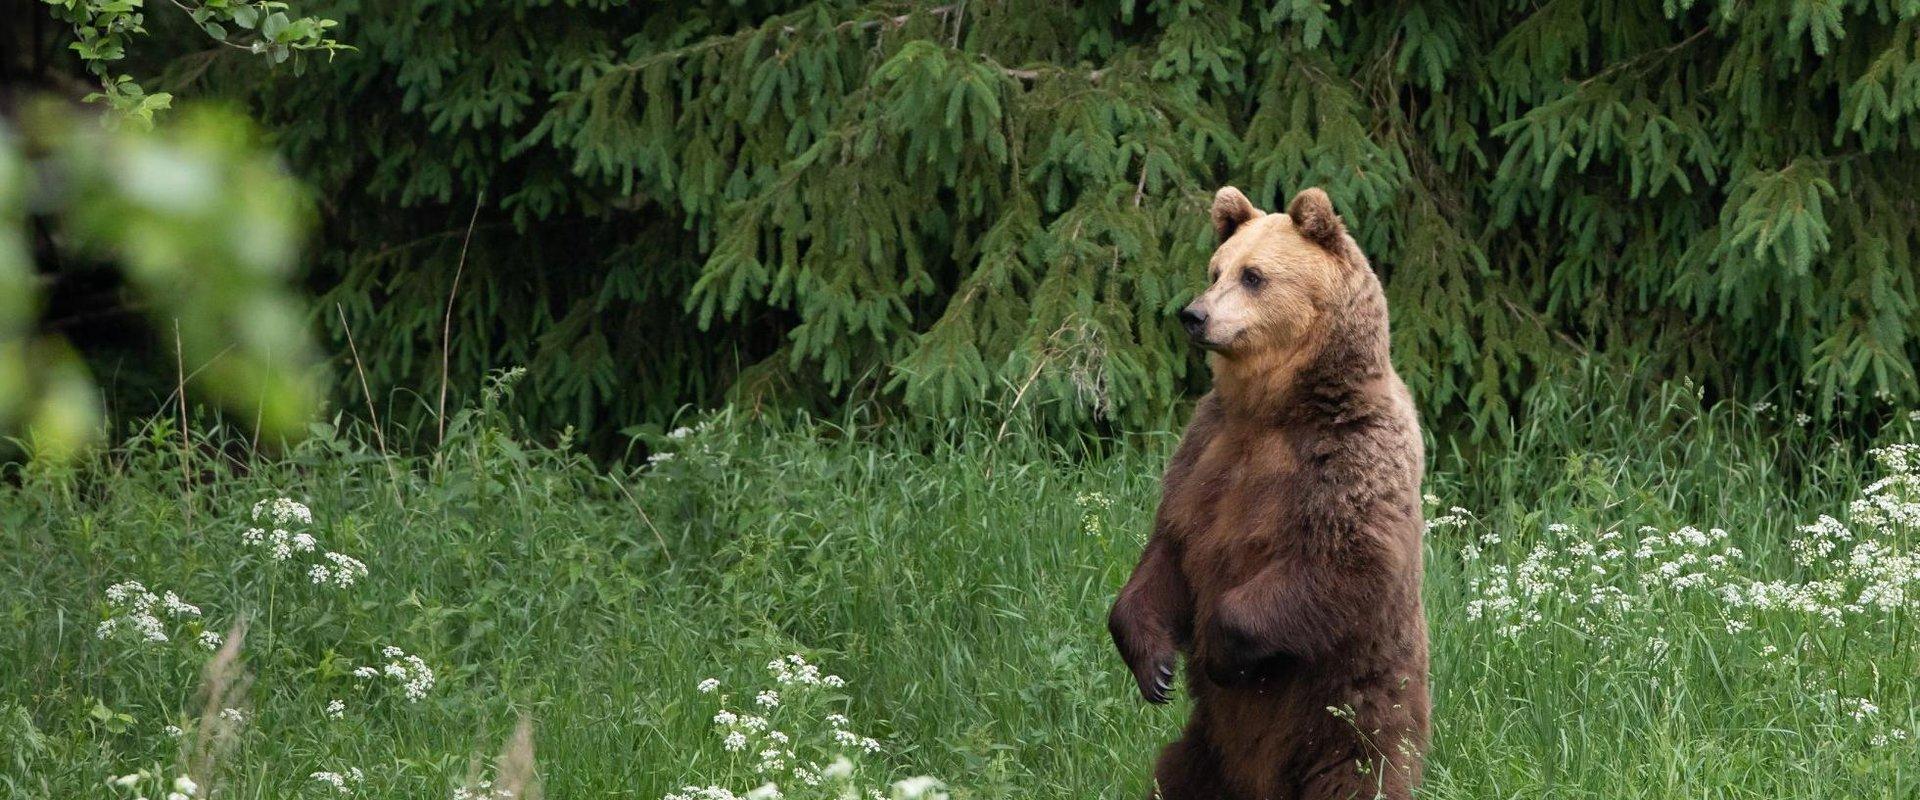 Bear watching with a nature photographer